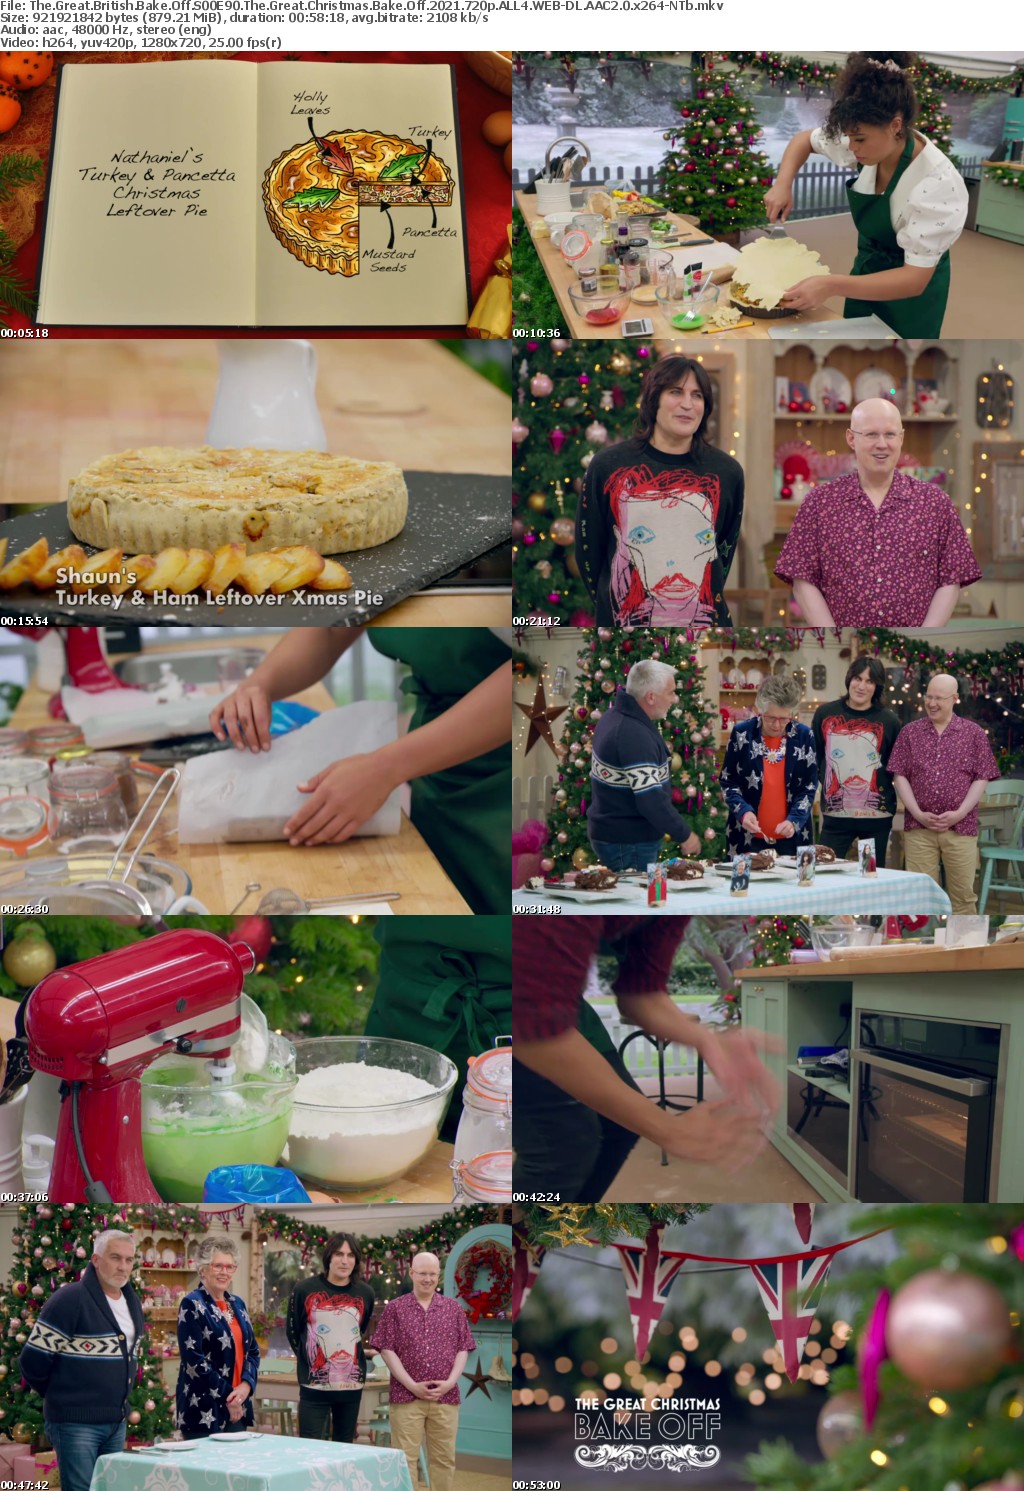 The Great British Bake Off S12E00 The Great Christmas Bake Off 720p ALL4 WEBRip AAC2 0 H264-NTb